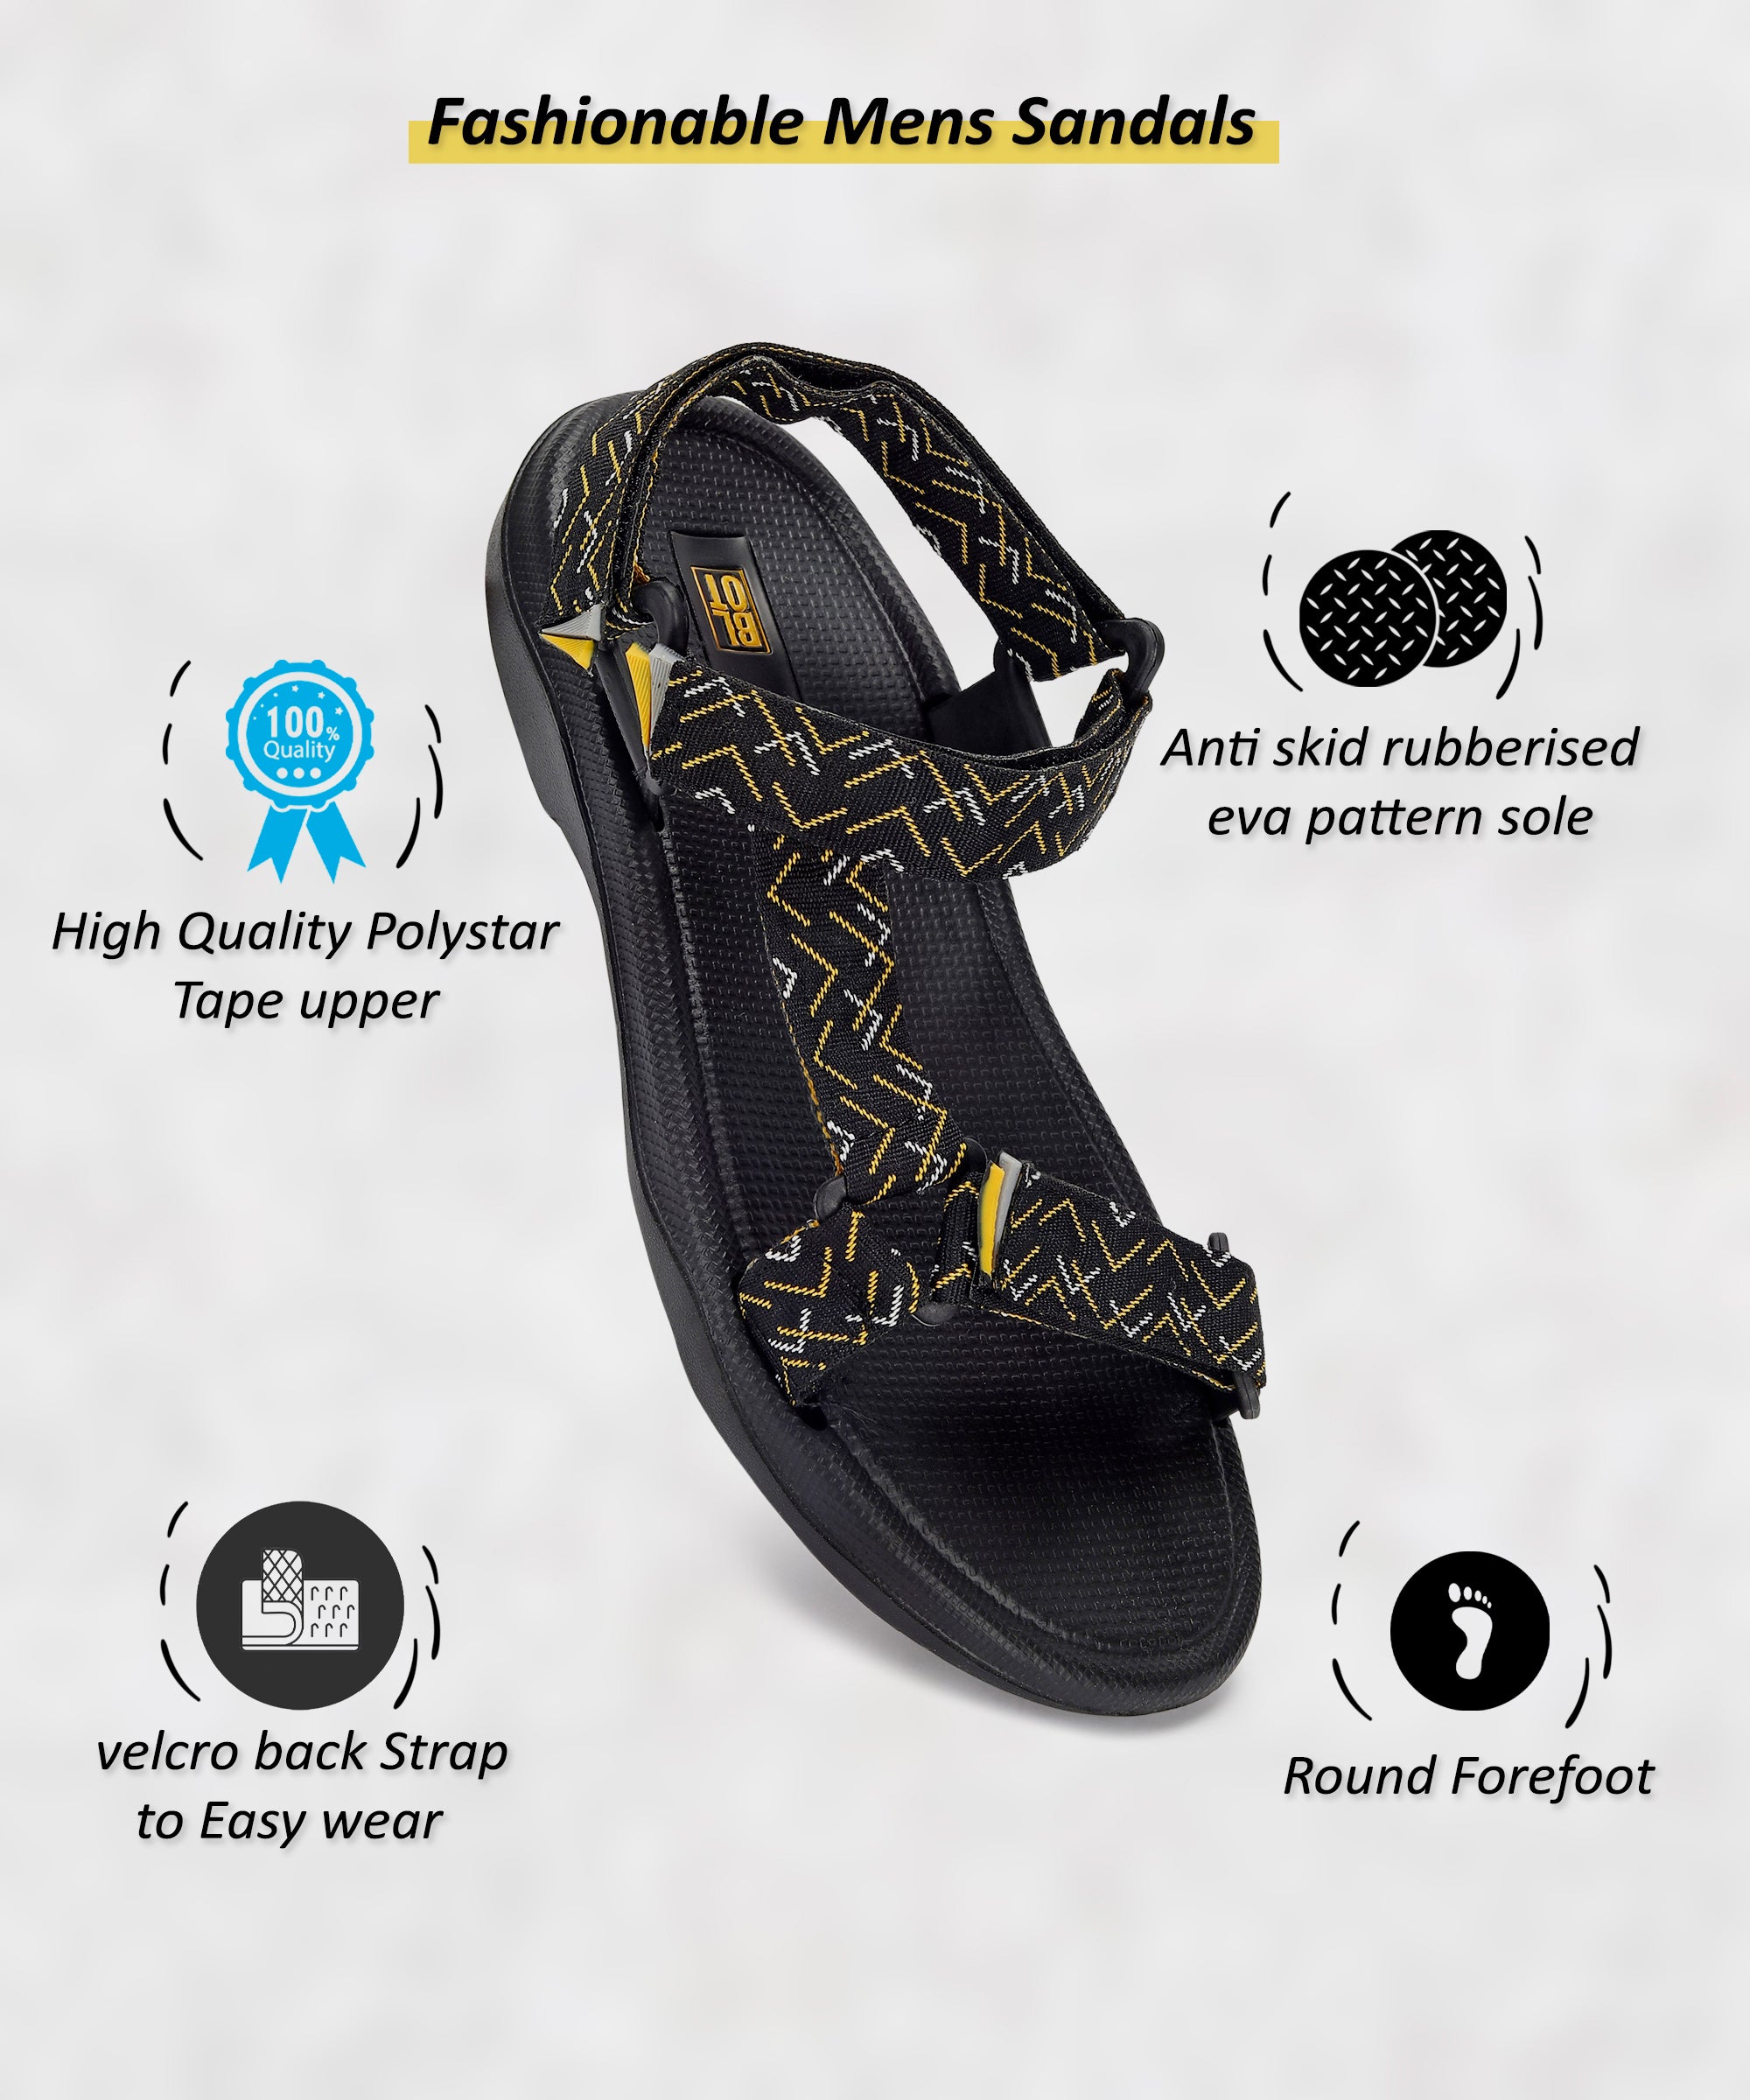 Paragon Blot EVK1416G Men Stylish Sandals | Comfortable Sandals for Daily Outdoor Use | Casual Formal Sandals with Cushioned Soles